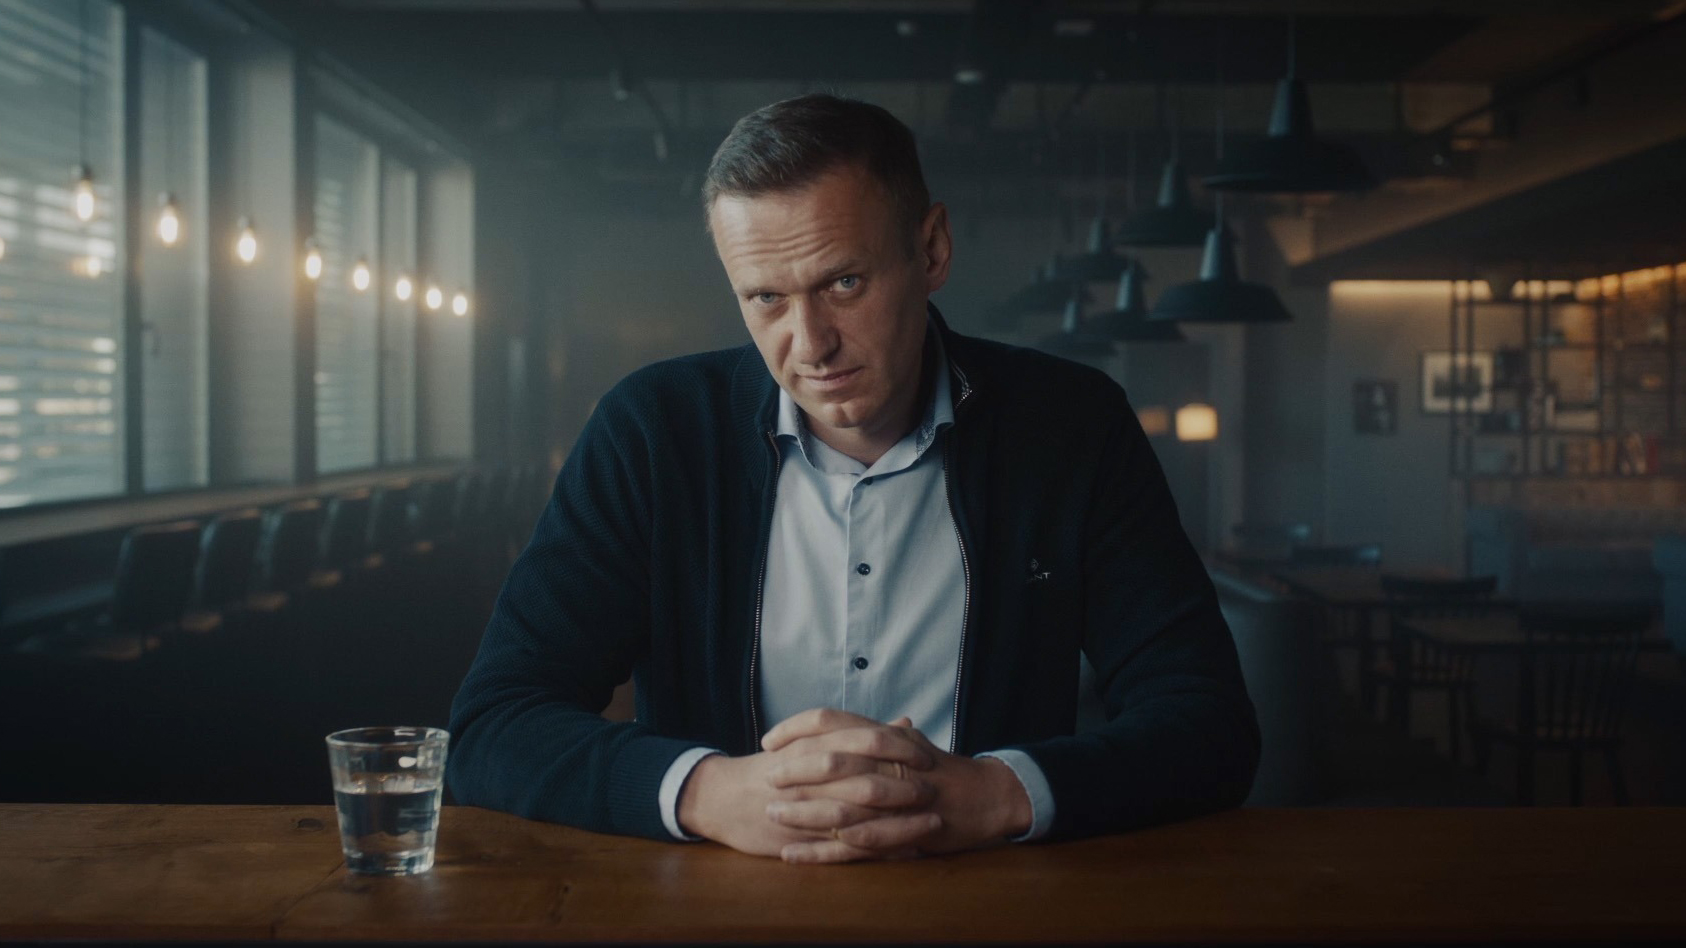 “Navalny,” a film that explores the plot to kill Russian anti-corruption campaigner and former presidential candidate, Alexey Navalny, has won the Oscar for best documentary feature at Sunday’s Academy Awards.